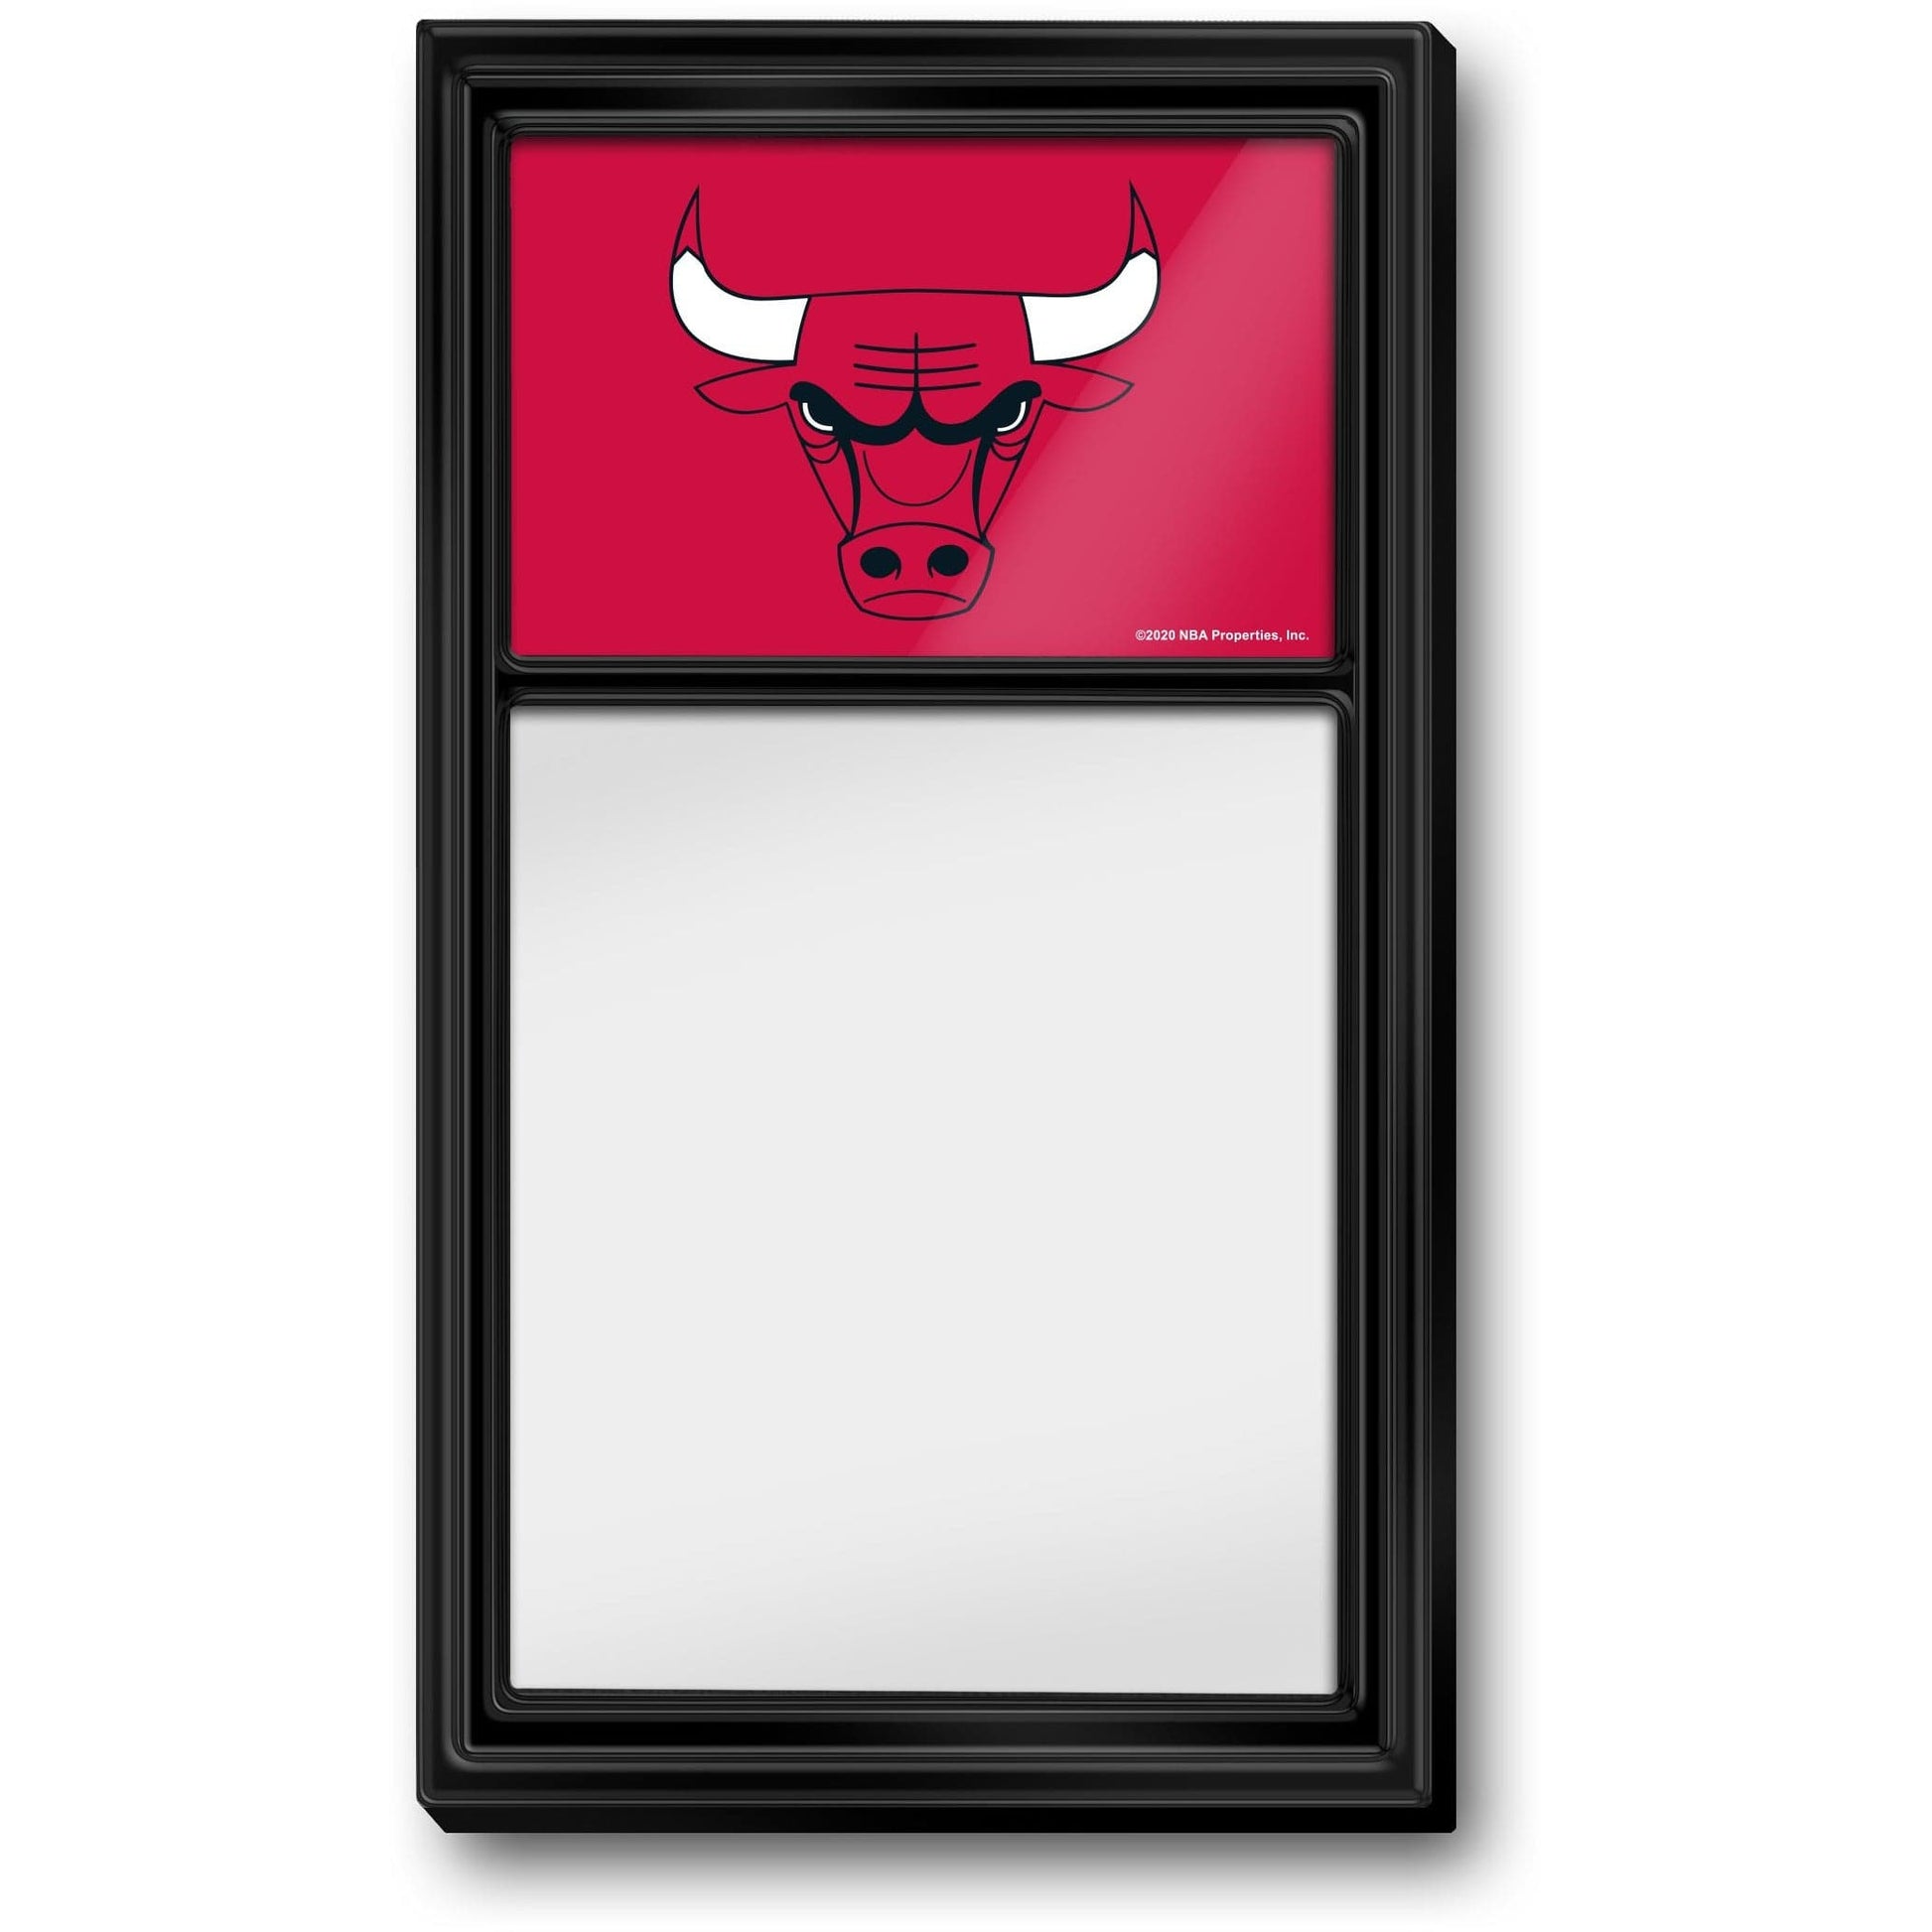 Chicago Bulls: Dry Erase Note Board - The Fan-Brand